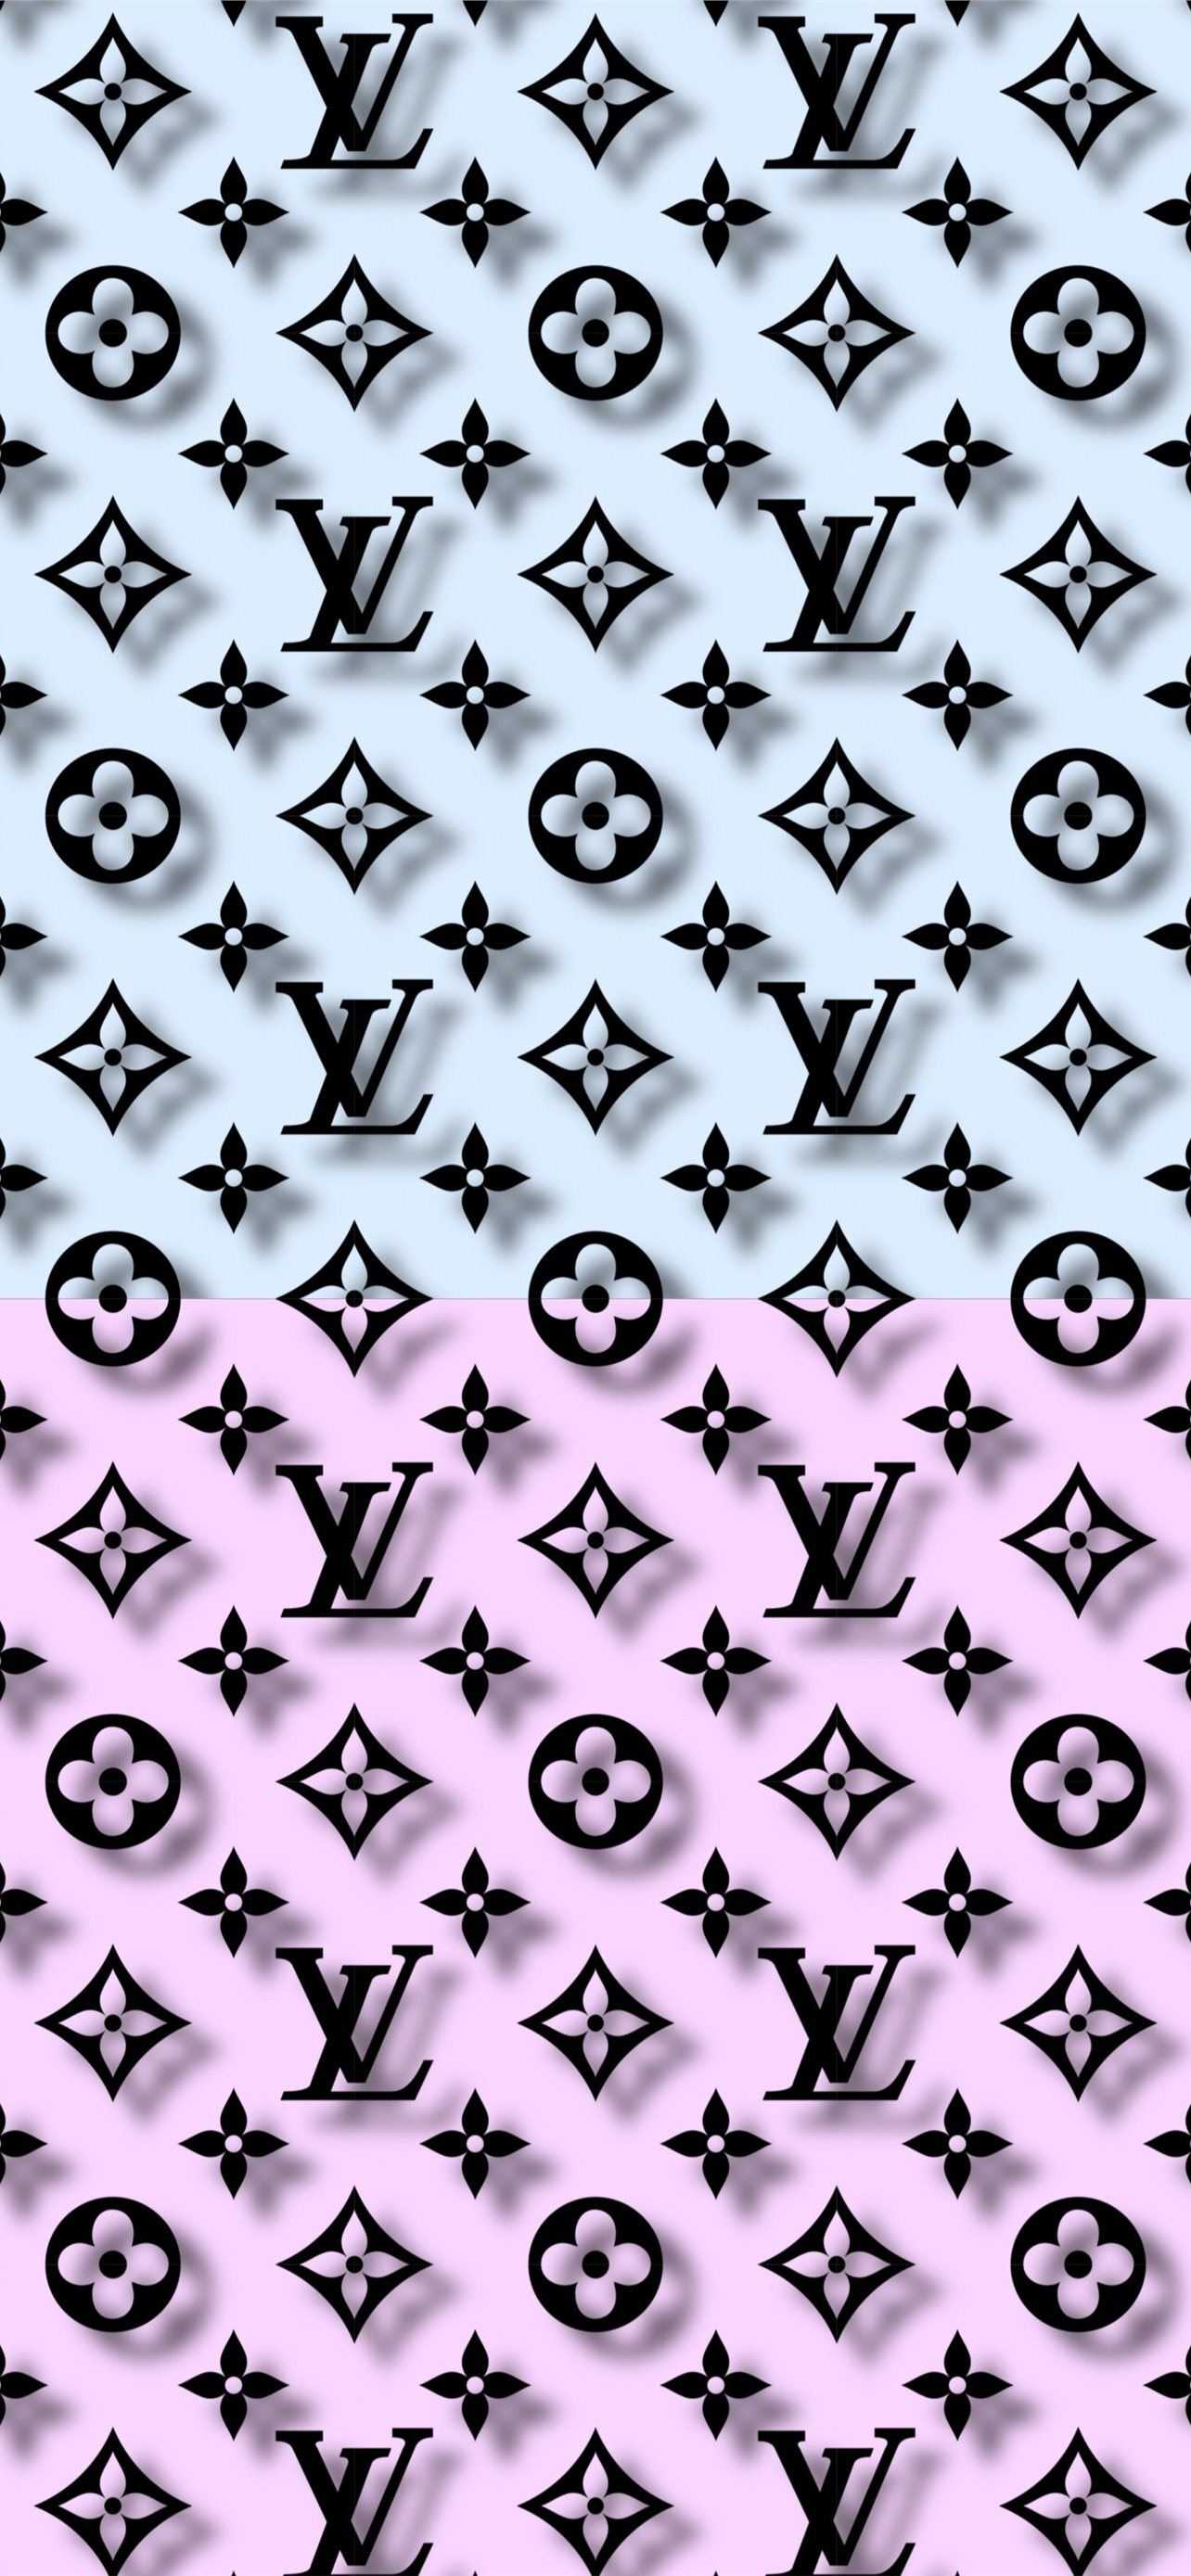 Louis Vuitton Wallpapers Group (57+)